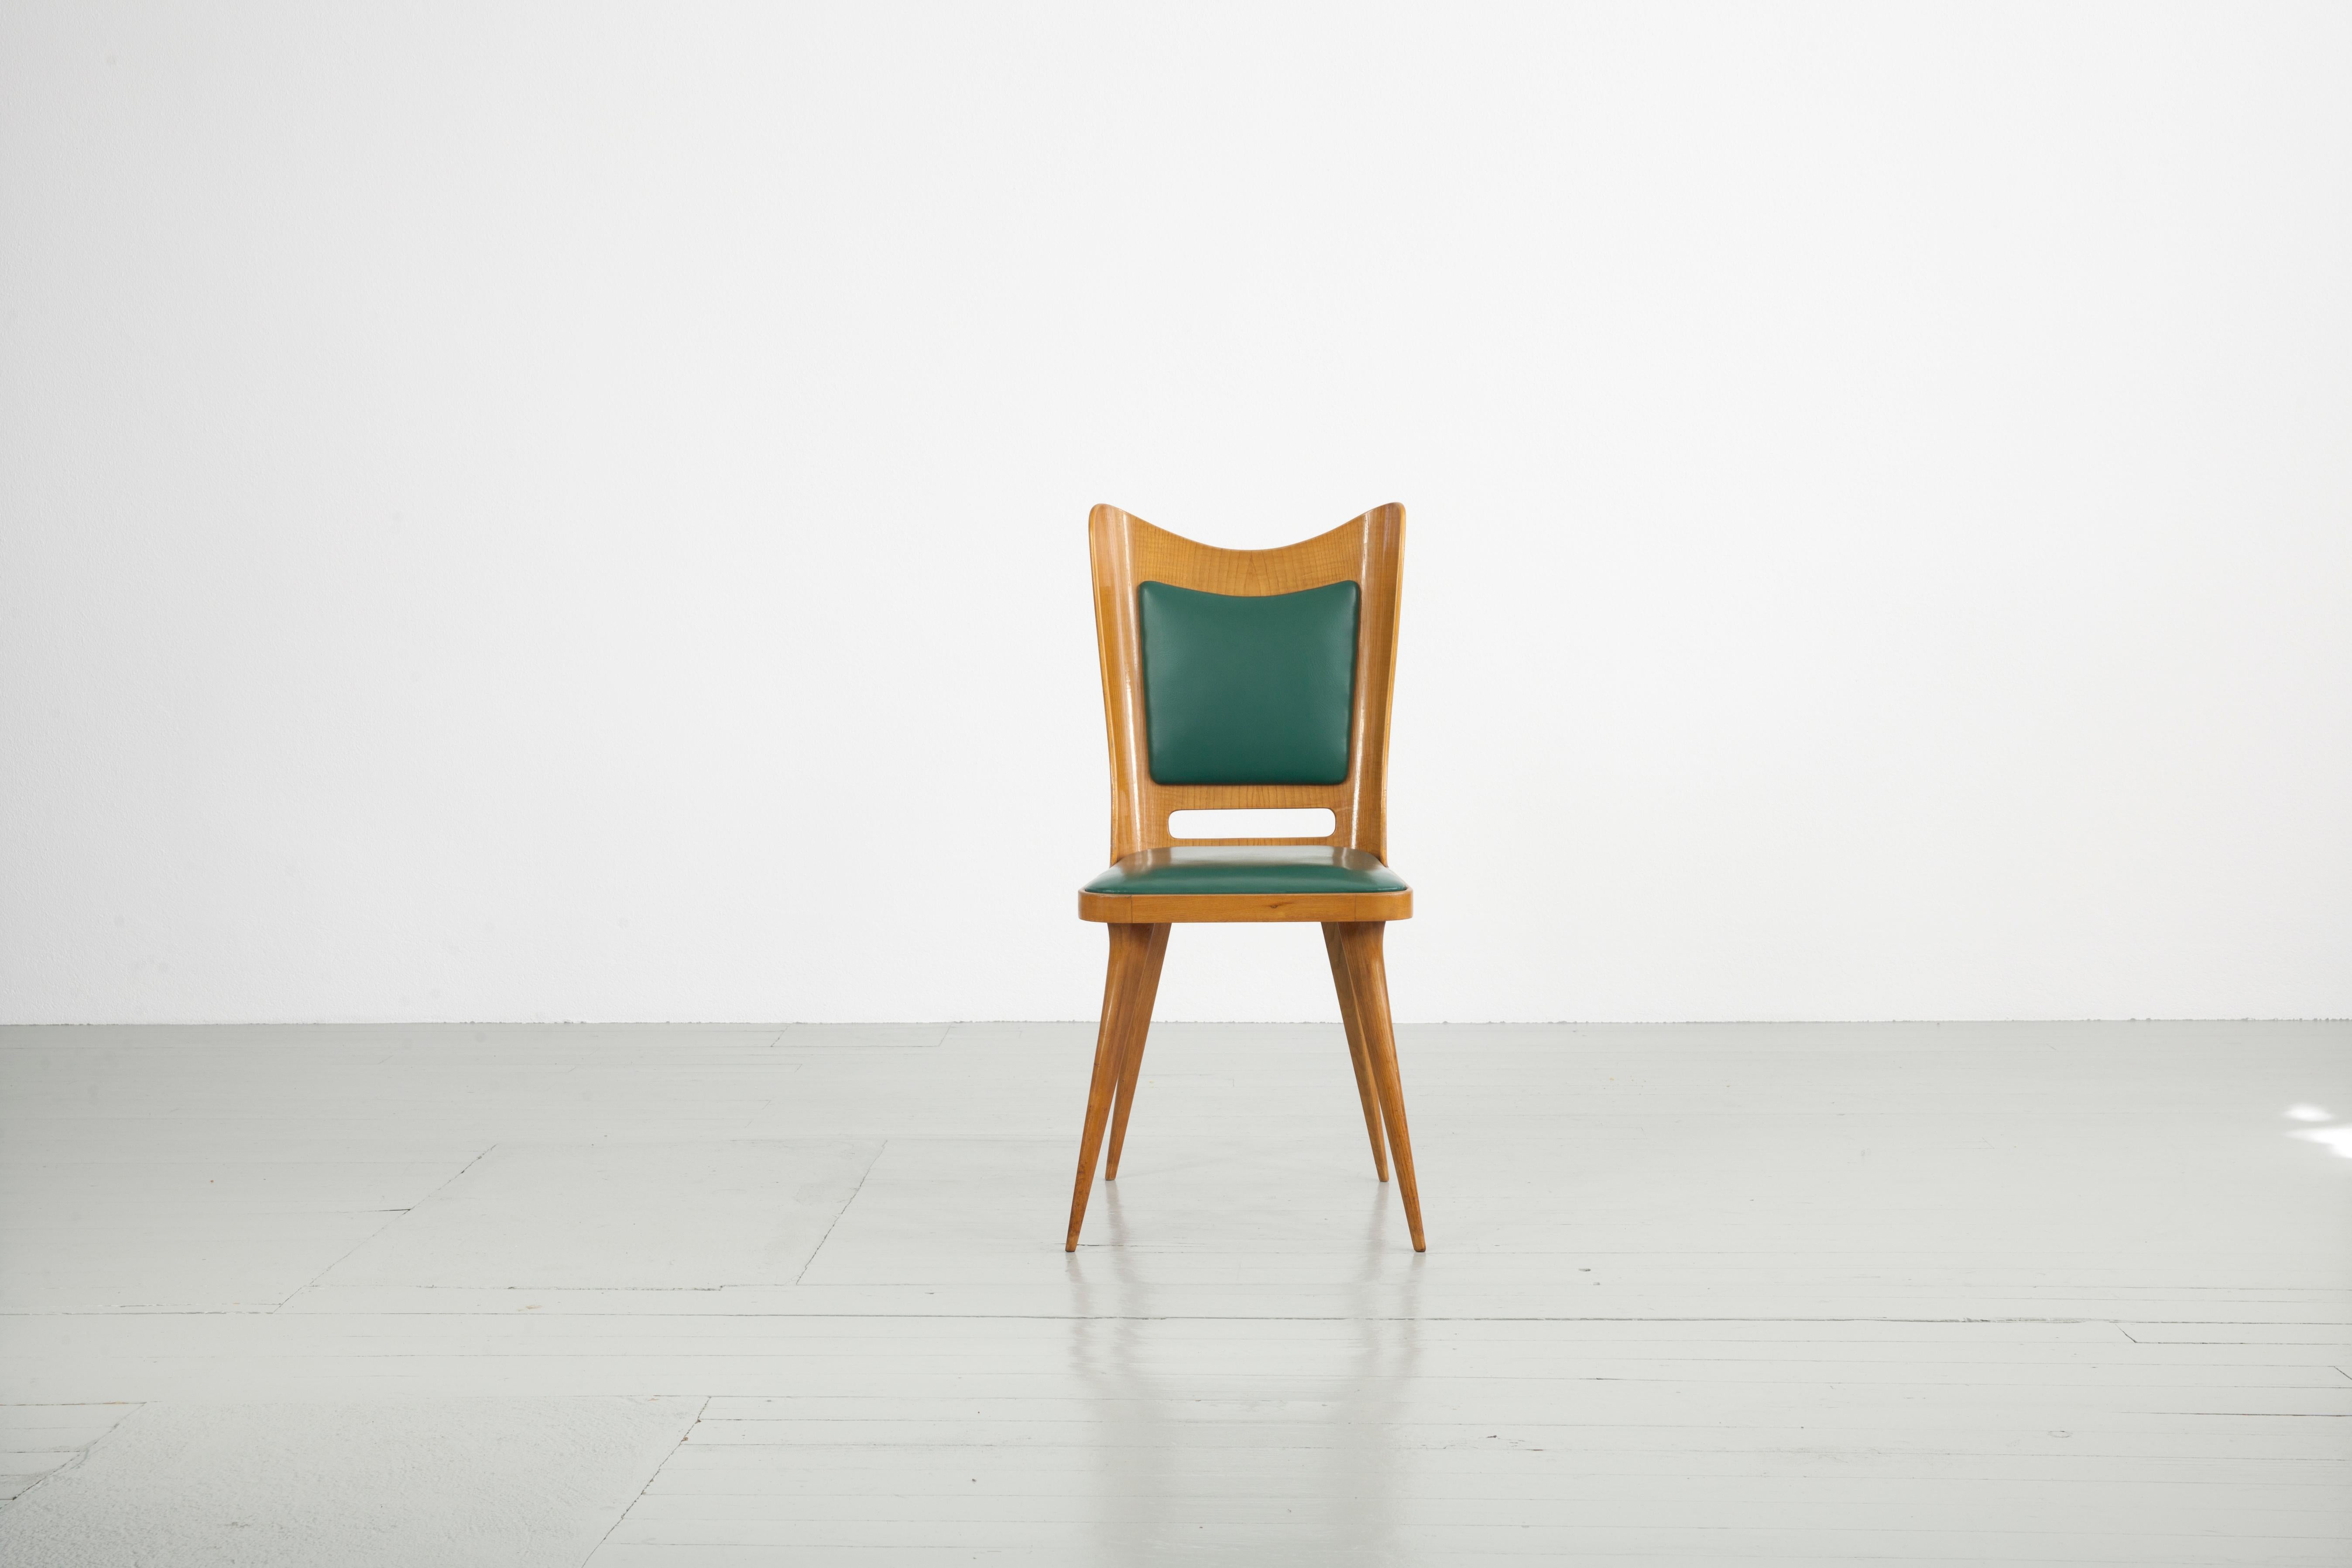 This set of six dining chairs was designed by Carlo Ratti in Italy in the 1950s. The light wood contrasts with the dark green vintage upholstery and the colour combination makes the chairs look classy and elegant. All pieces have been completely